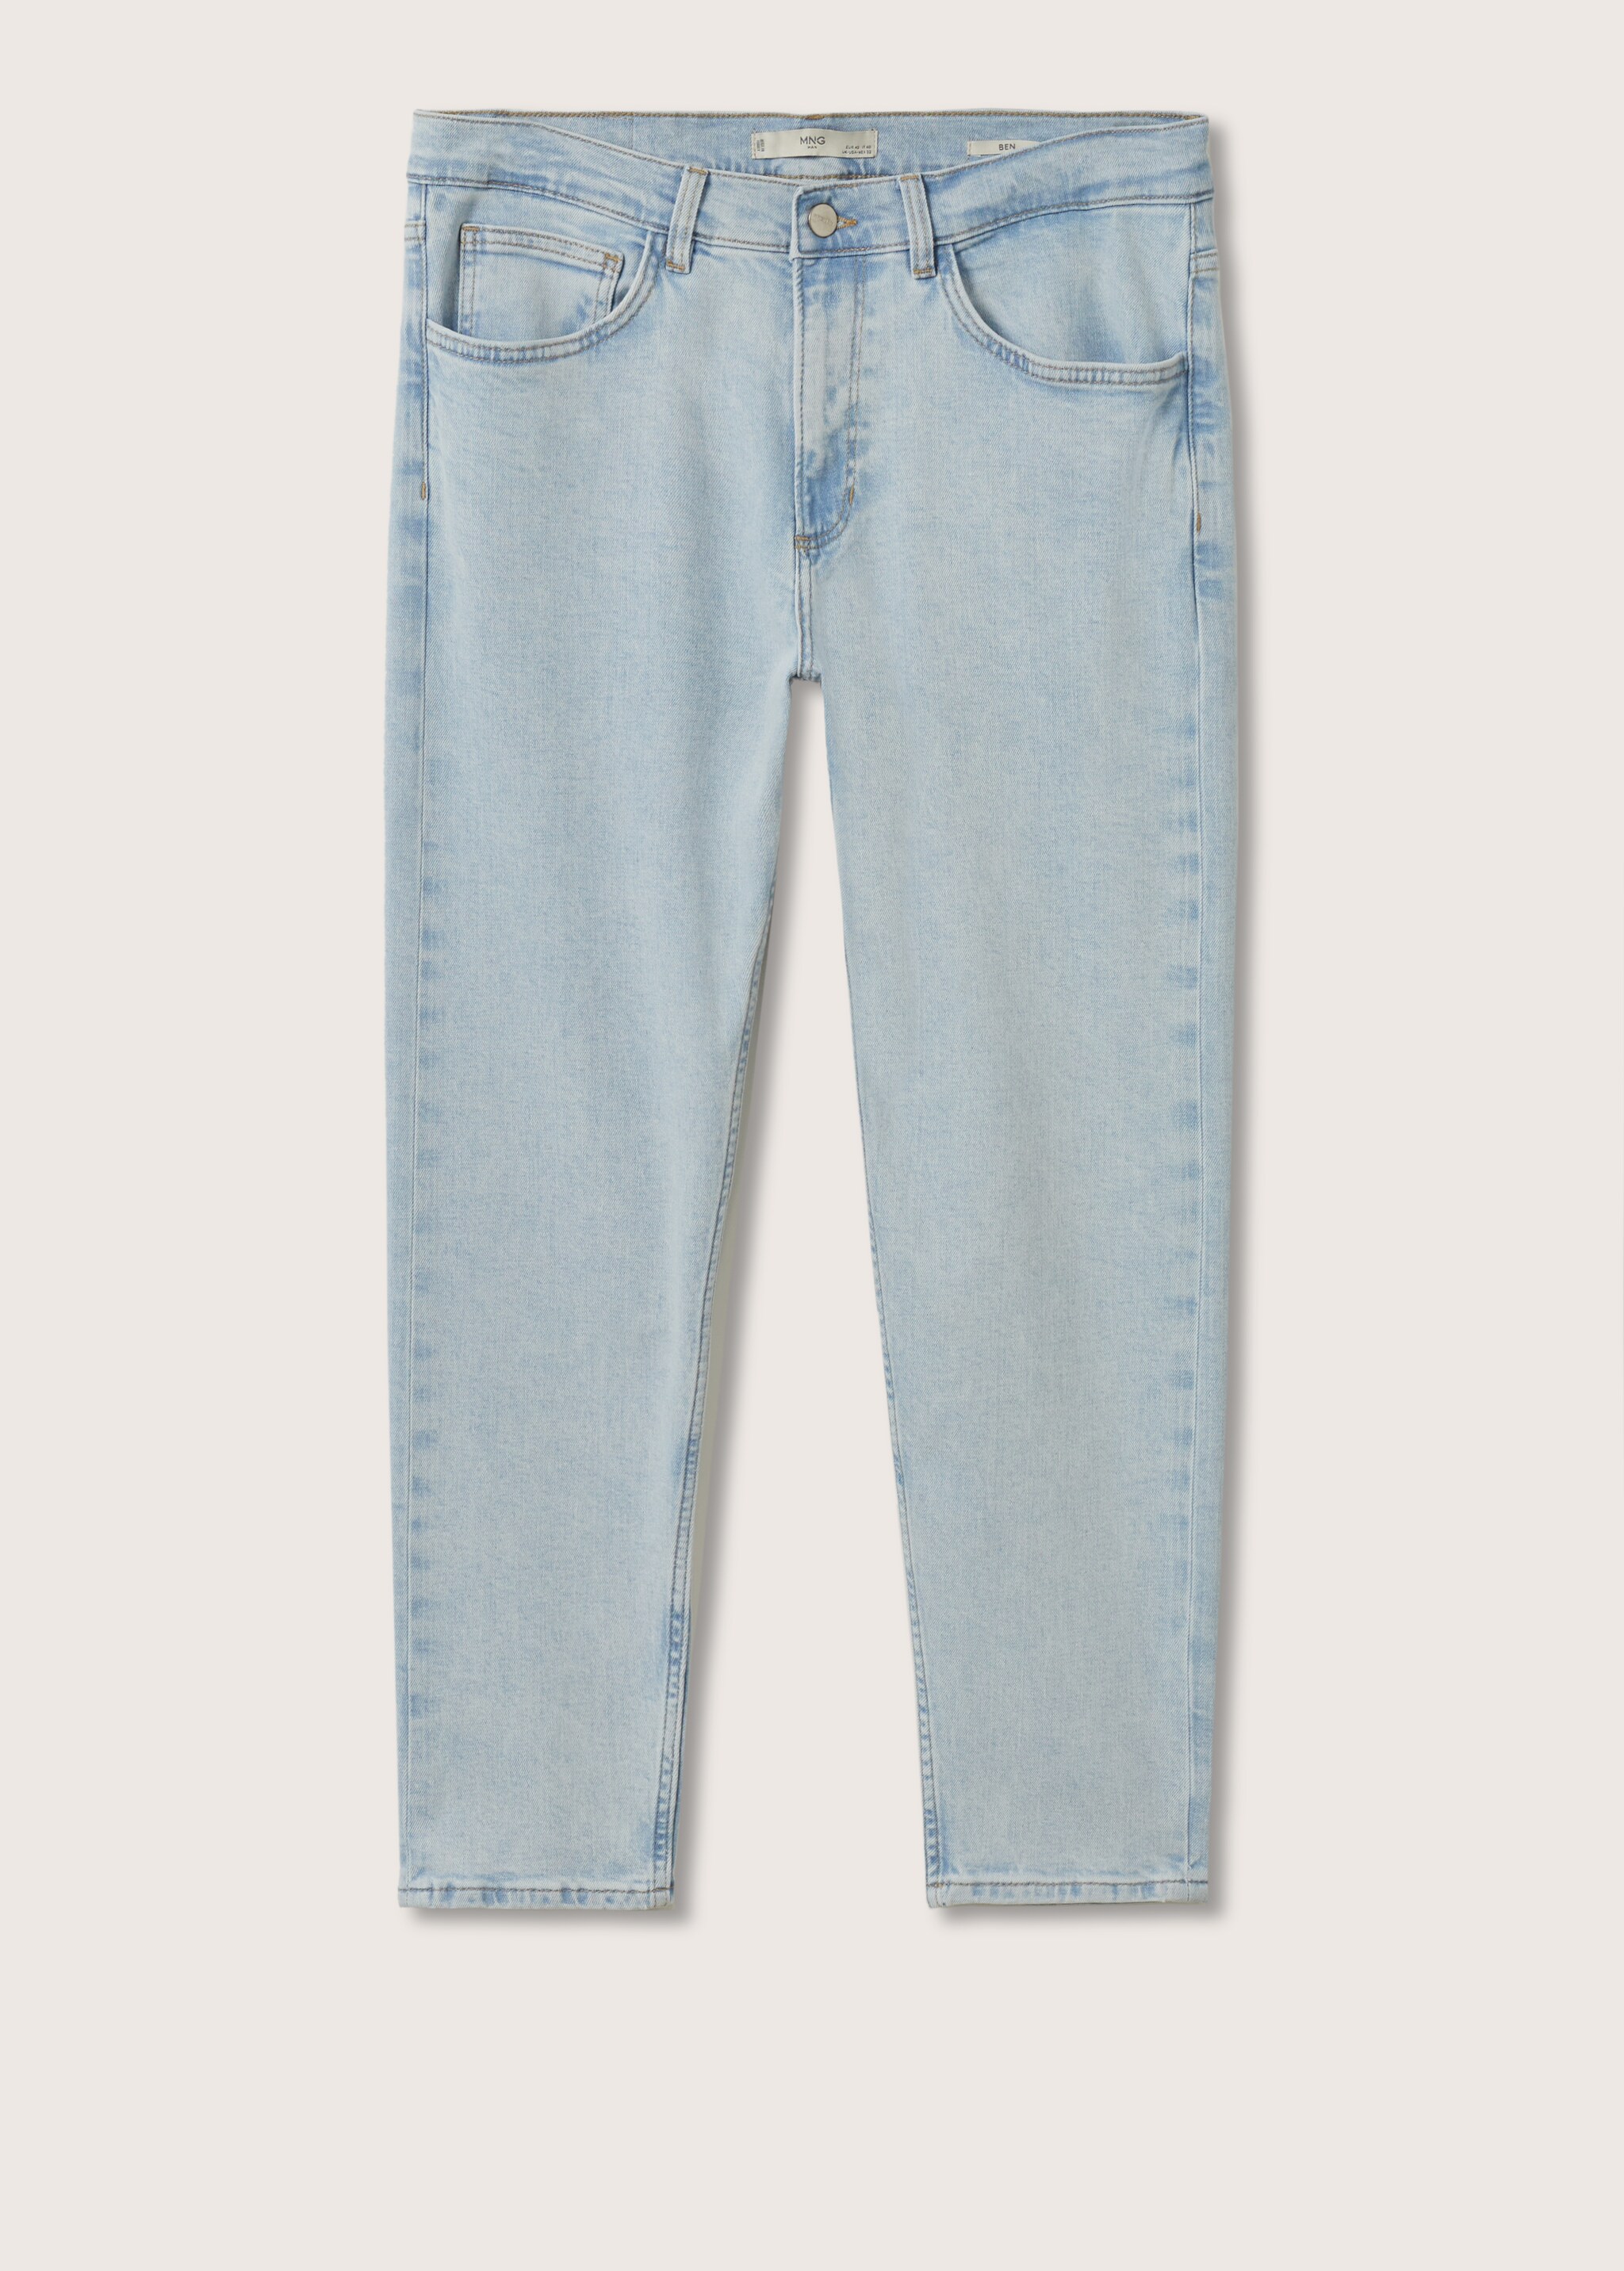 Ben tapered cropped jeans - Article without model